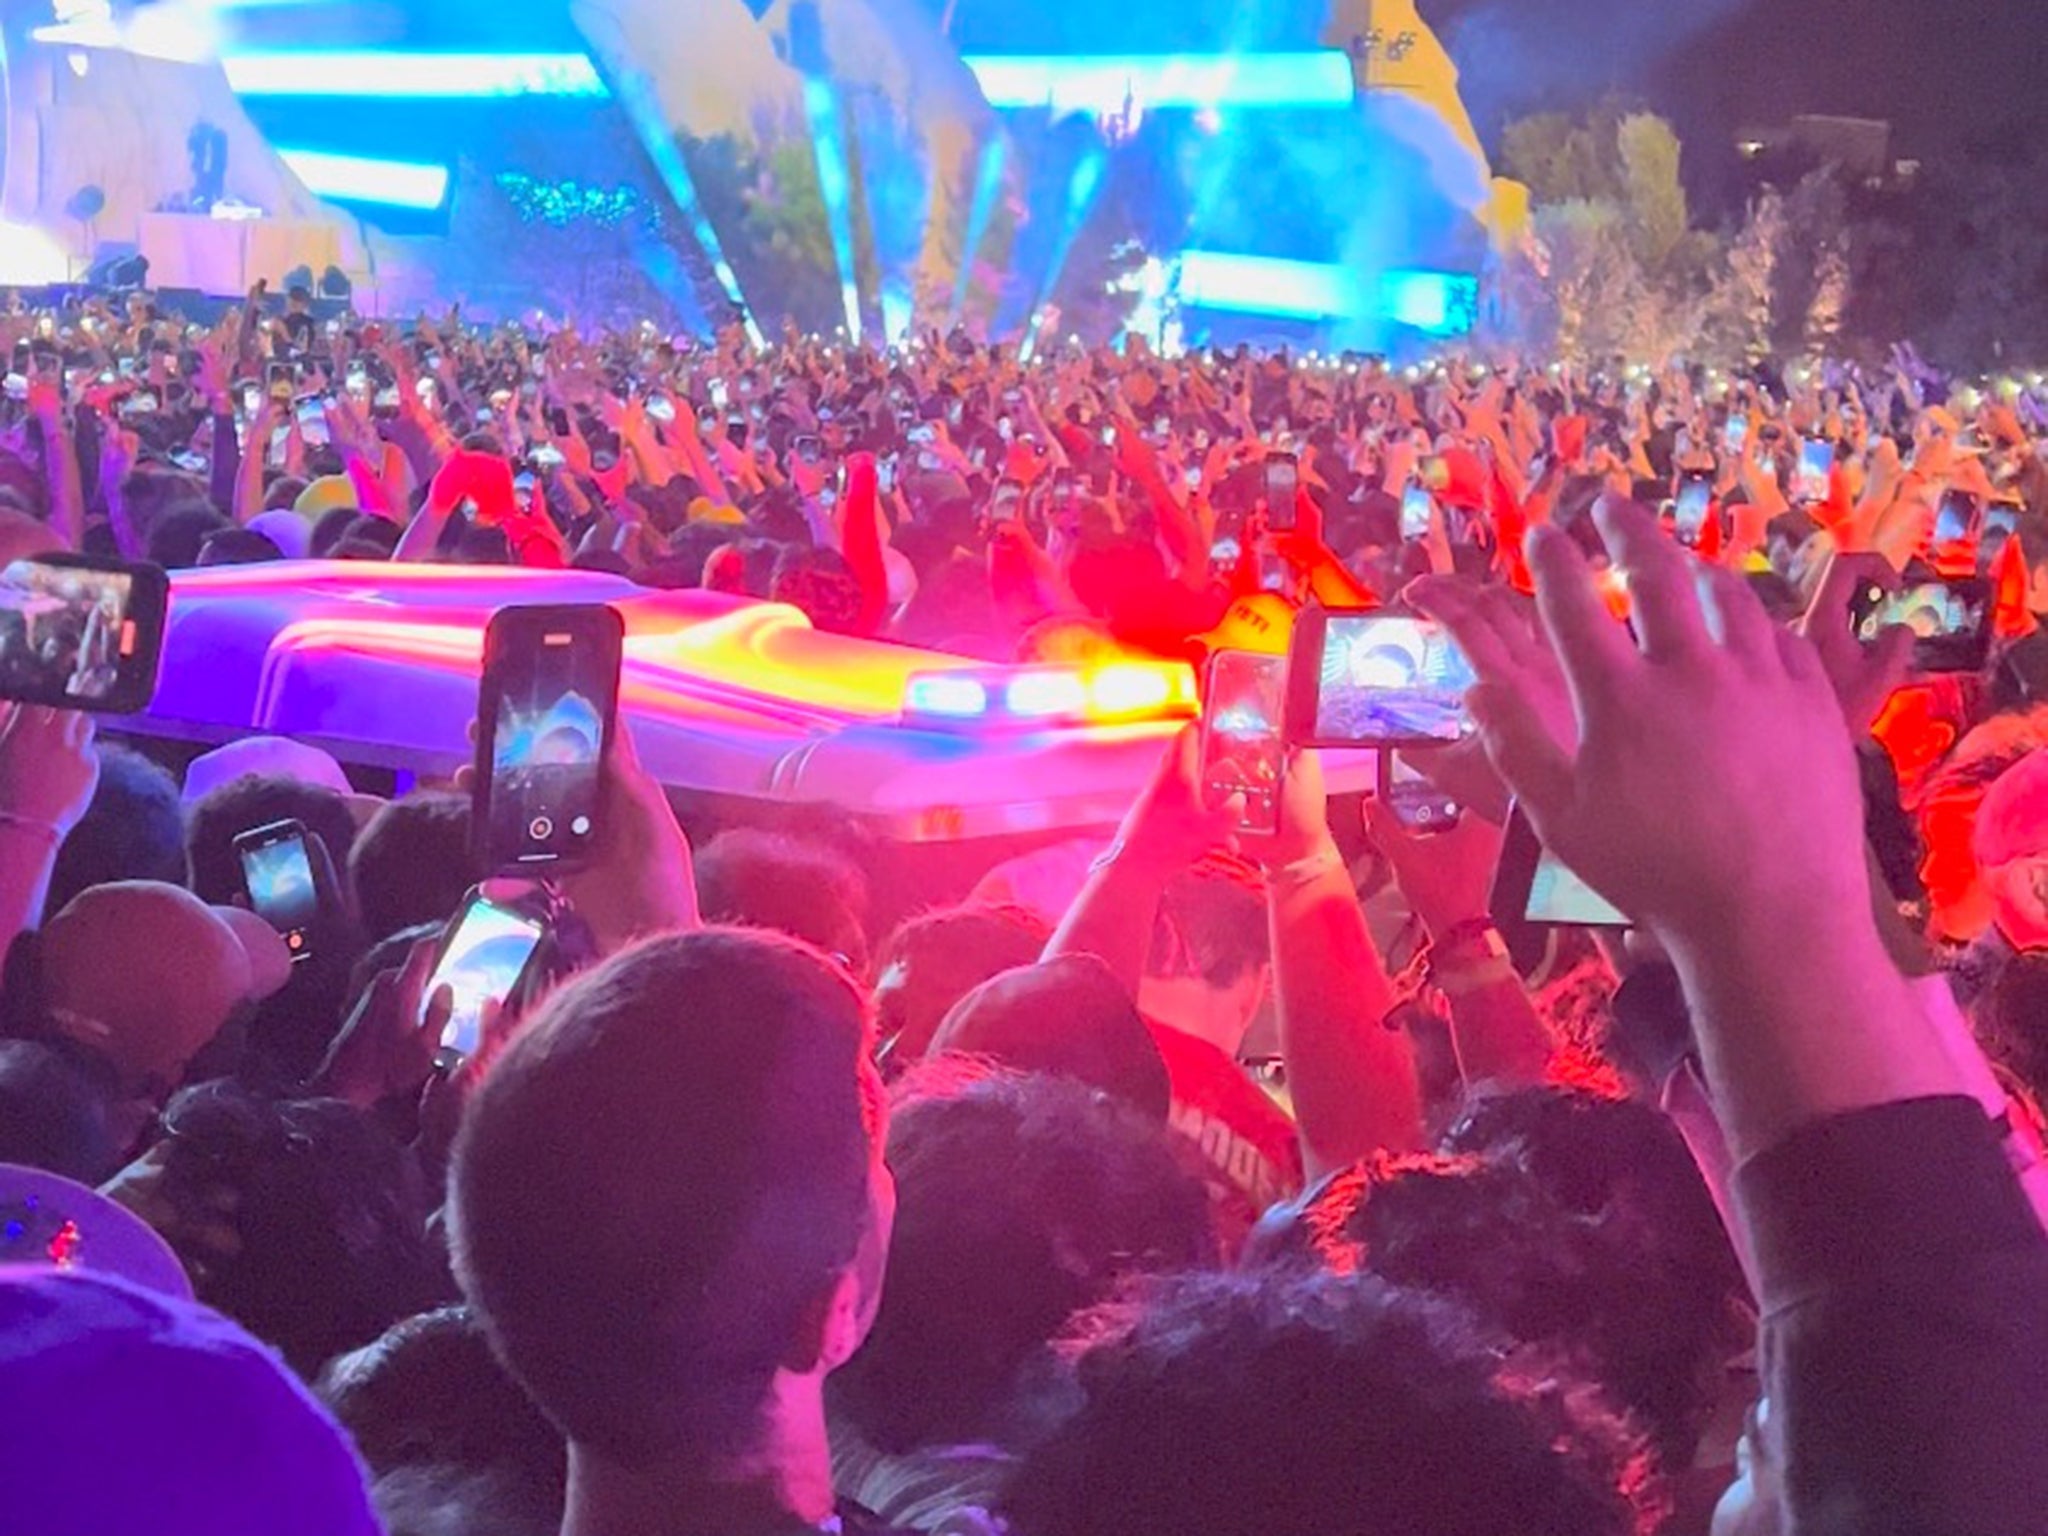 An ambulance is seen making its way through the crowd at Astroworld